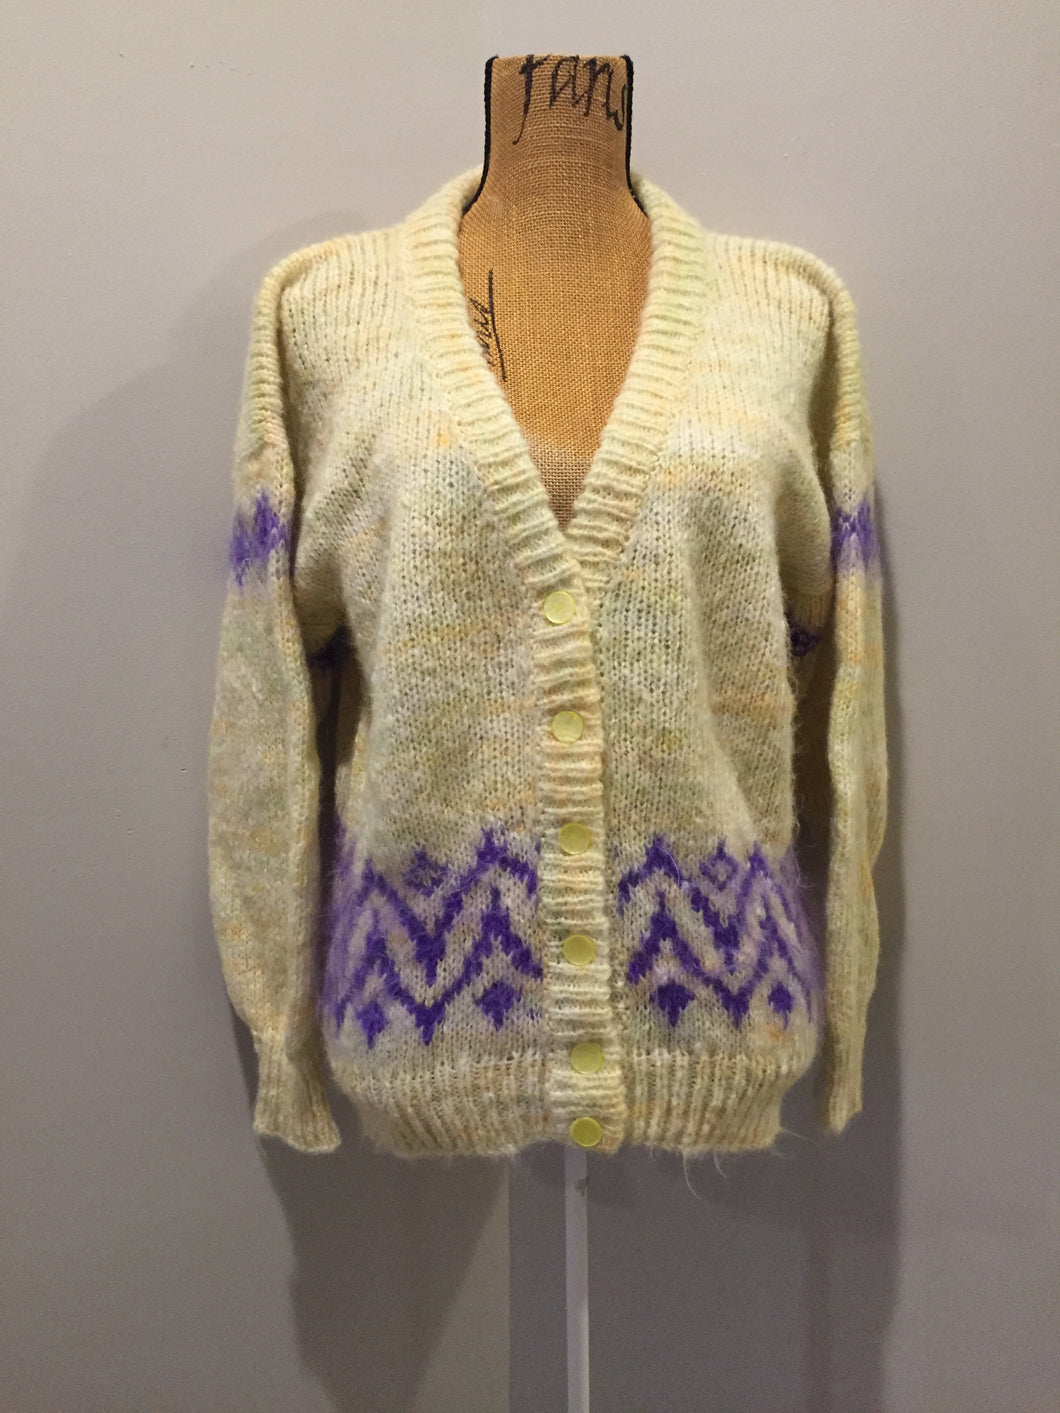 Kingspier Vintage - Hand knit cardigan in pale yellow with purple design and button closures. Size medium.